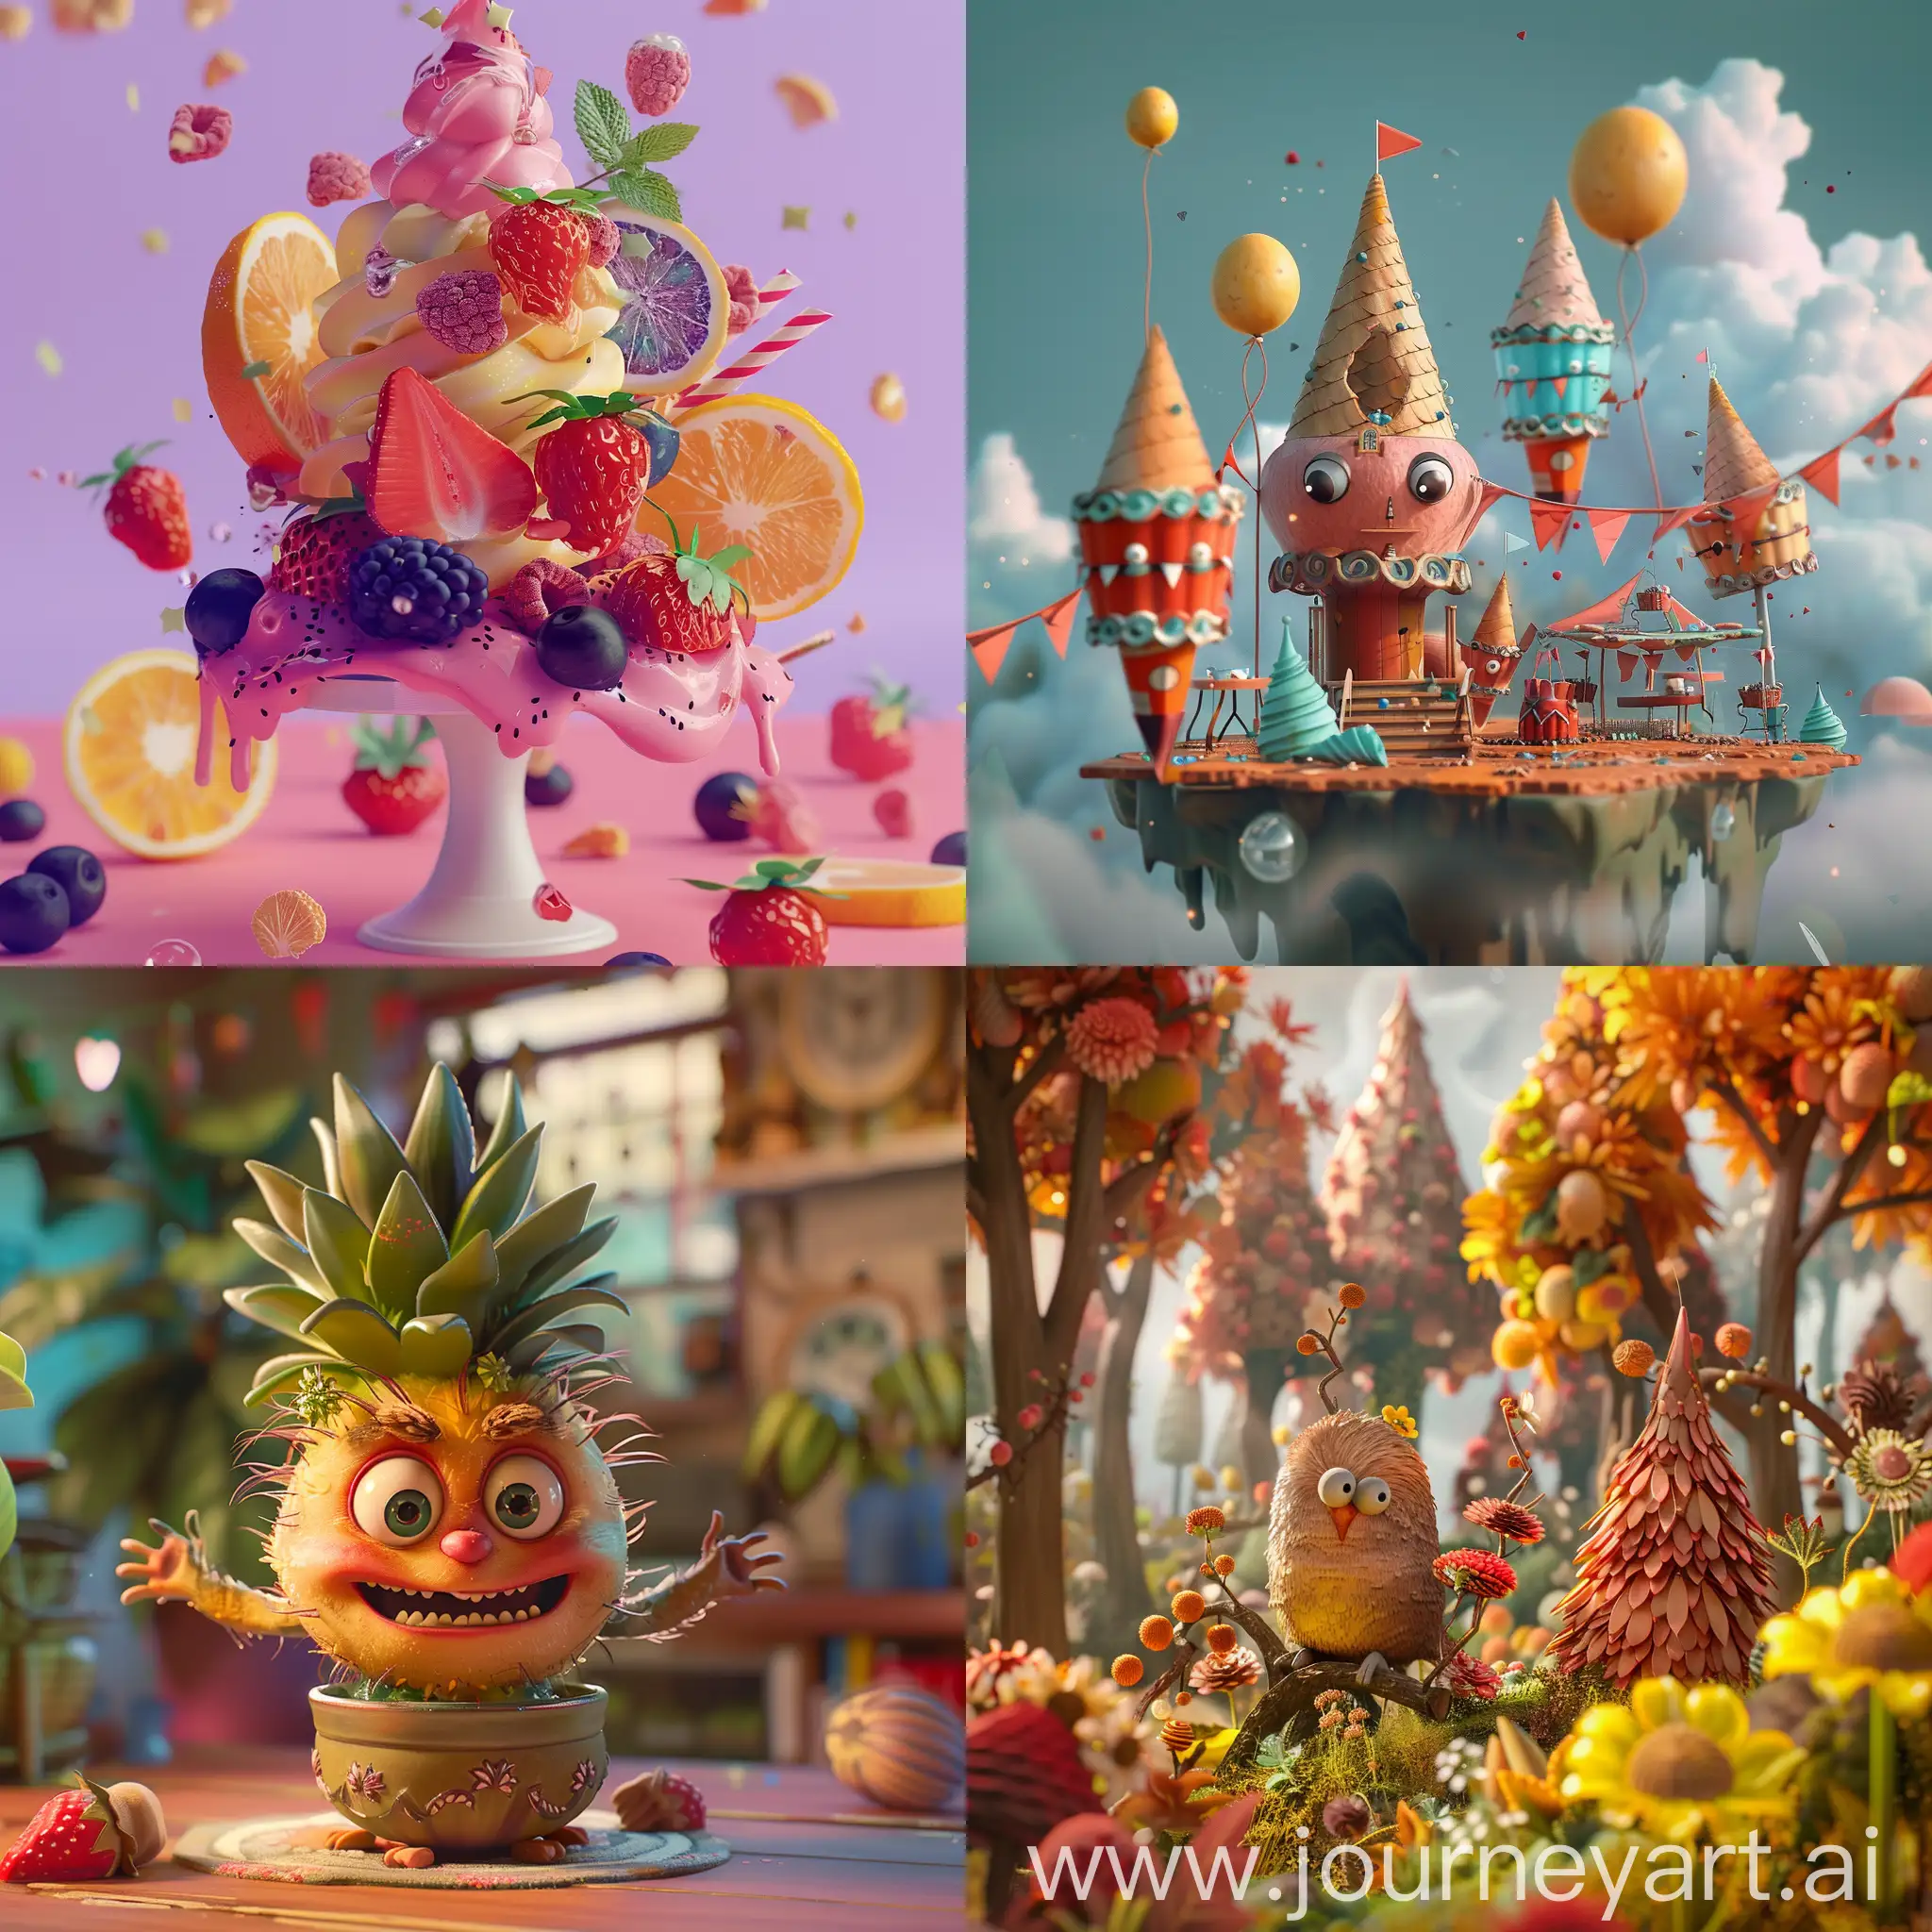 Joyful-Jamming-with-Ice-Cream-Cones-Colorful-3D-Animation